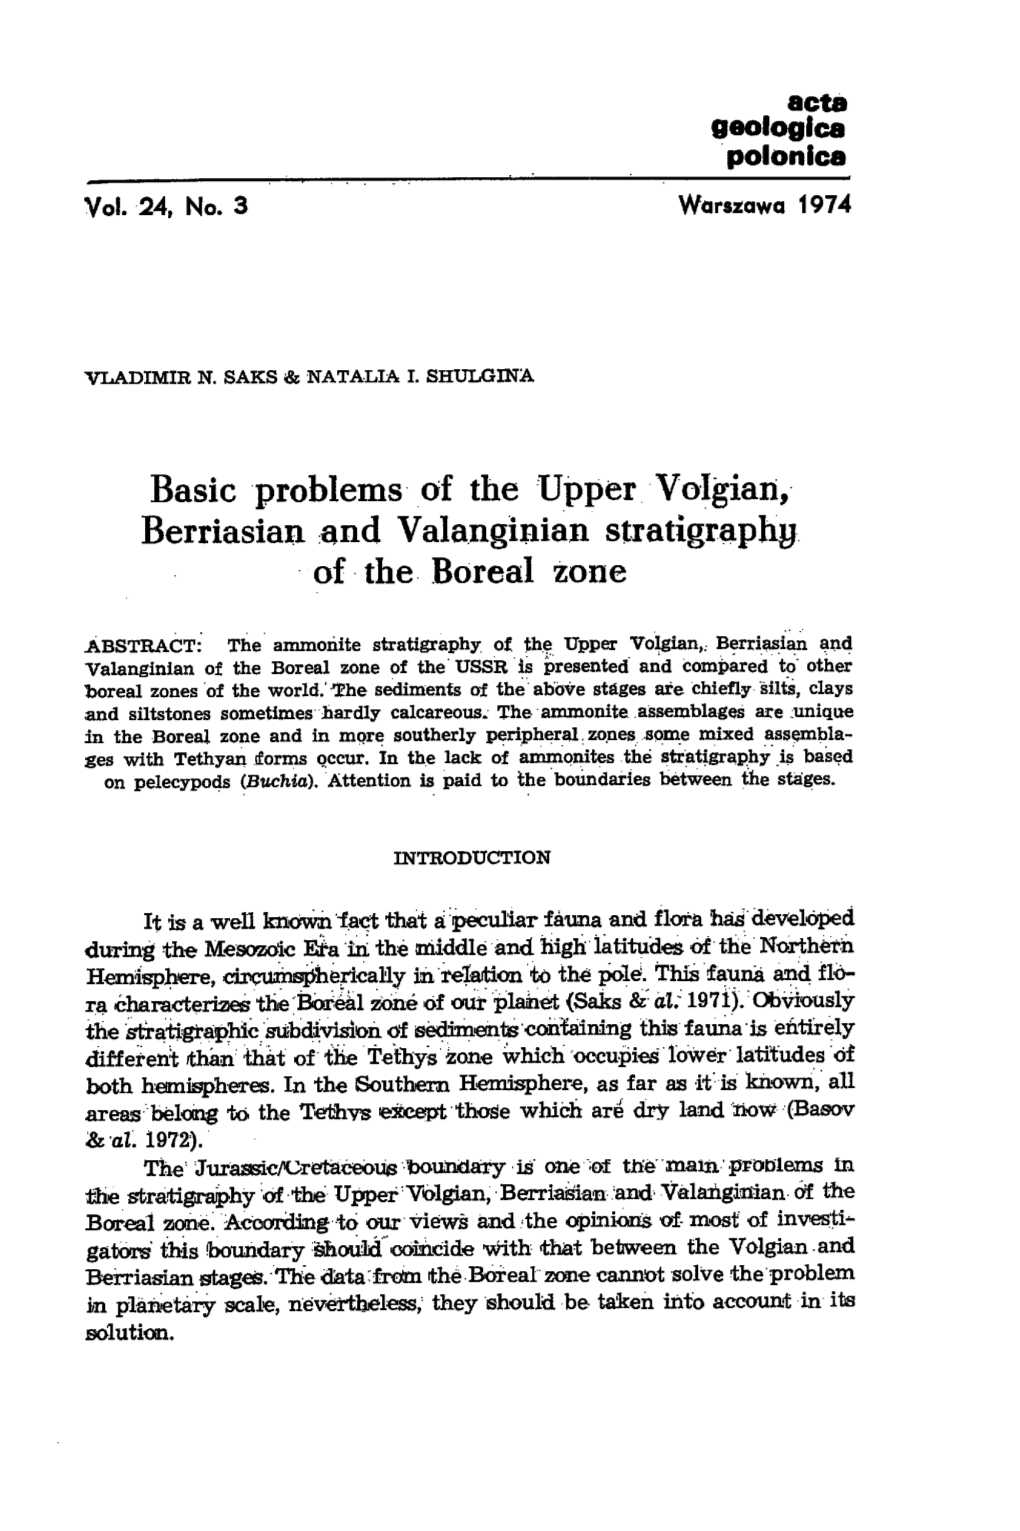 Problems of the :Upper Voigian, Berriasian :And Valanginian Stratigr~Ph!J of ,The Boreal Zone